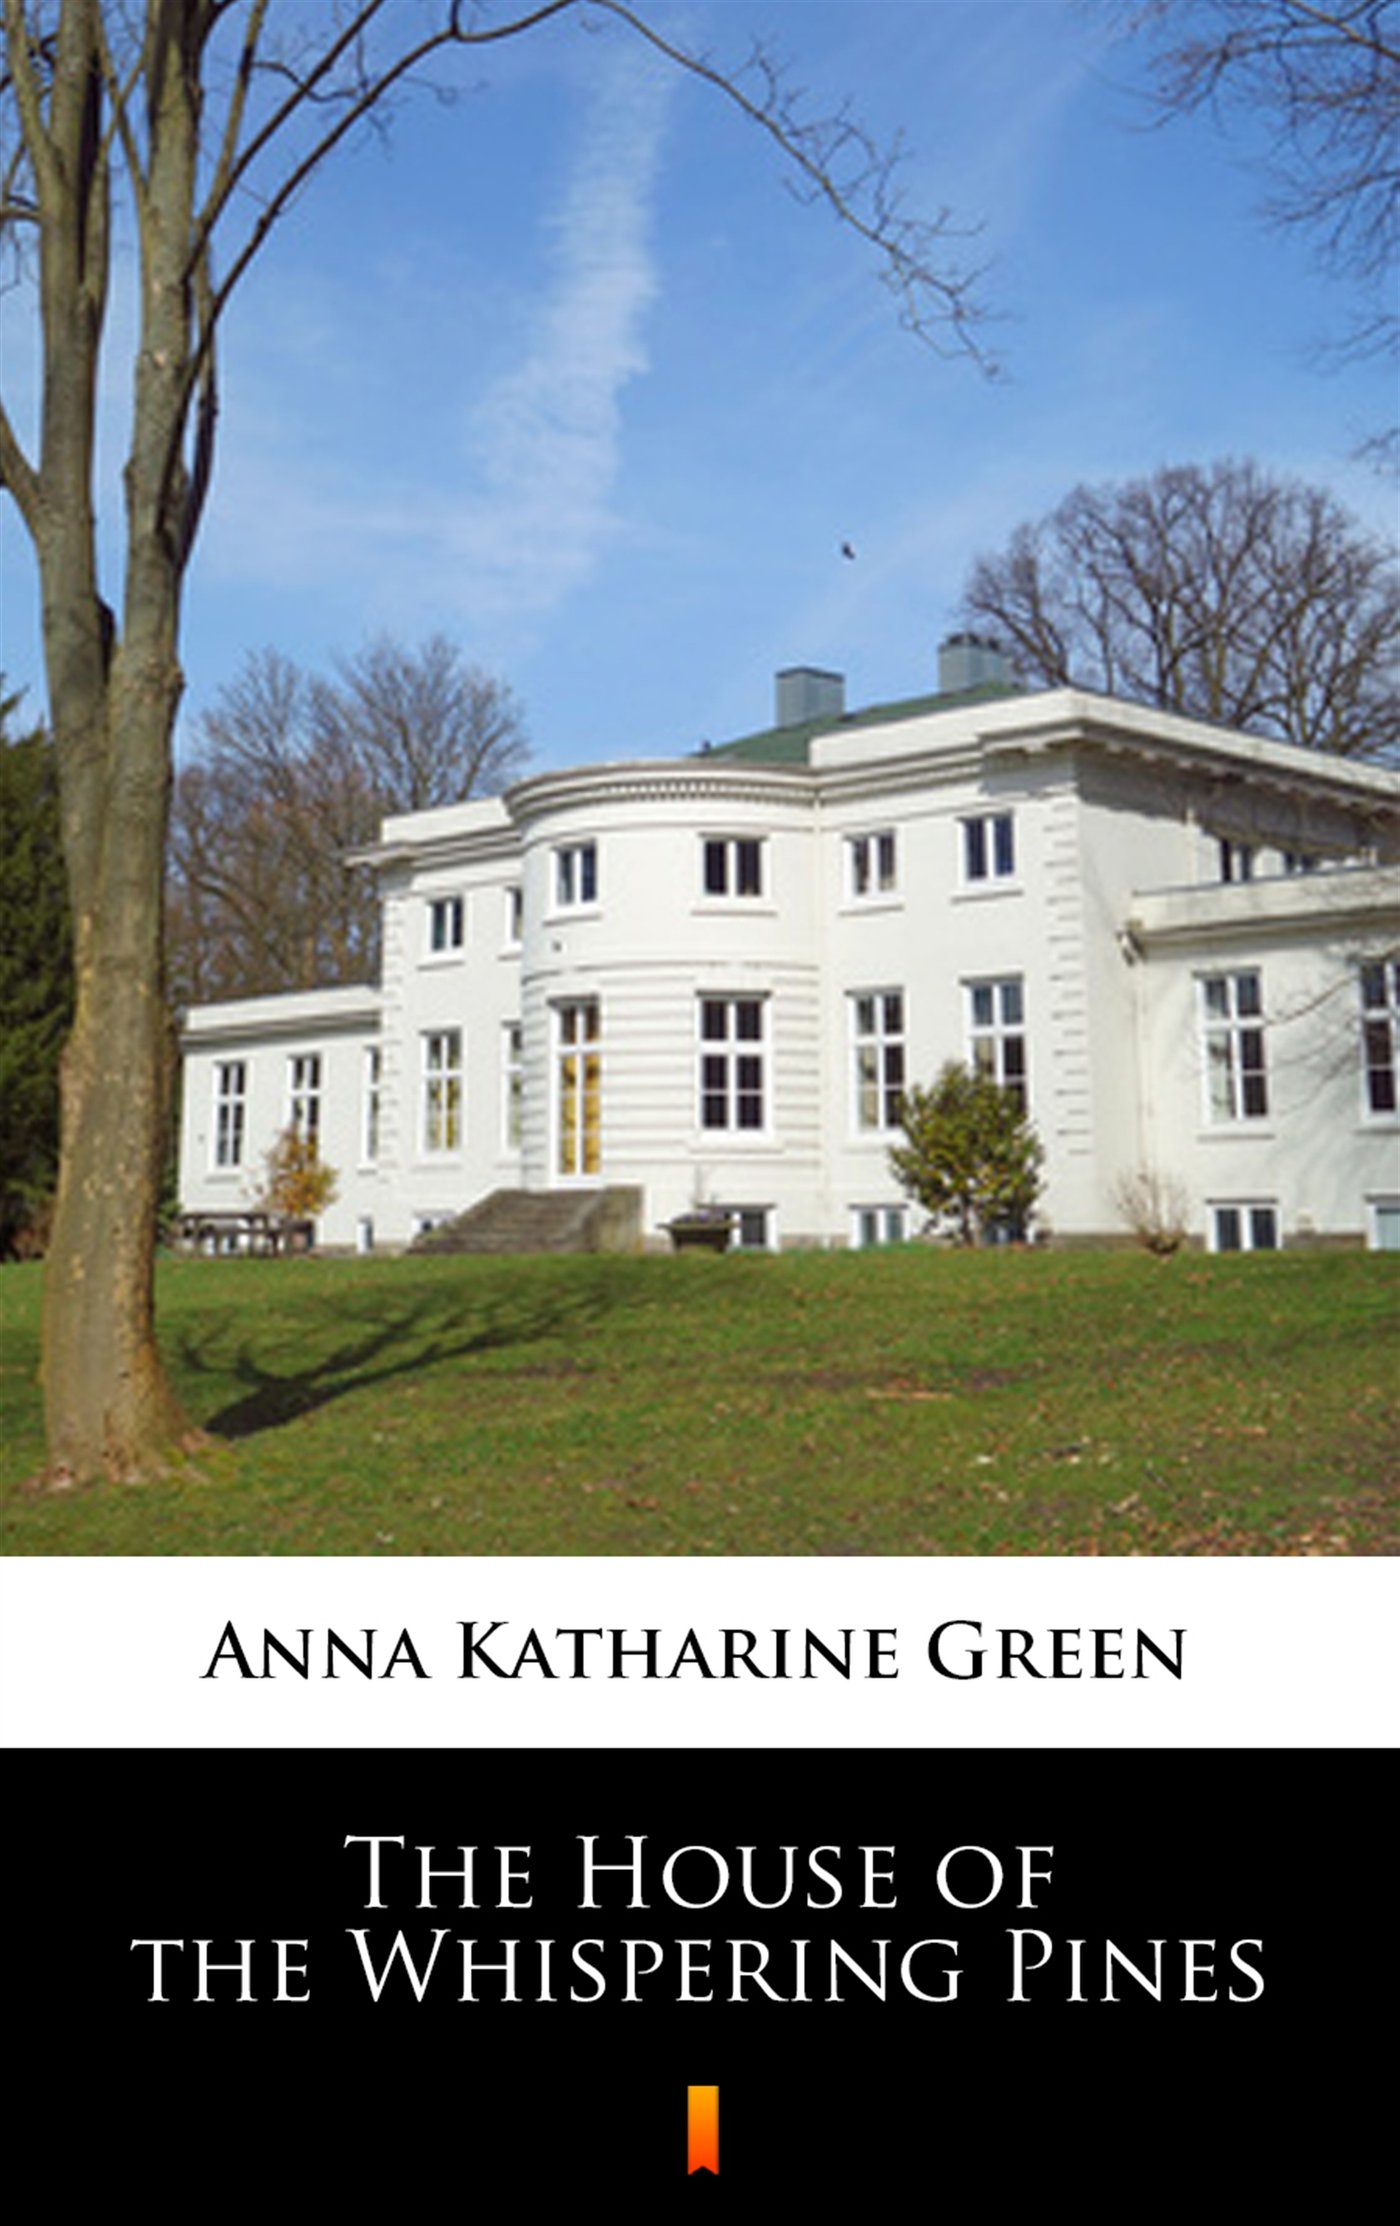 Ebook The House of the Whispering Pines, Anna Katharine Green - Virtualo.pl